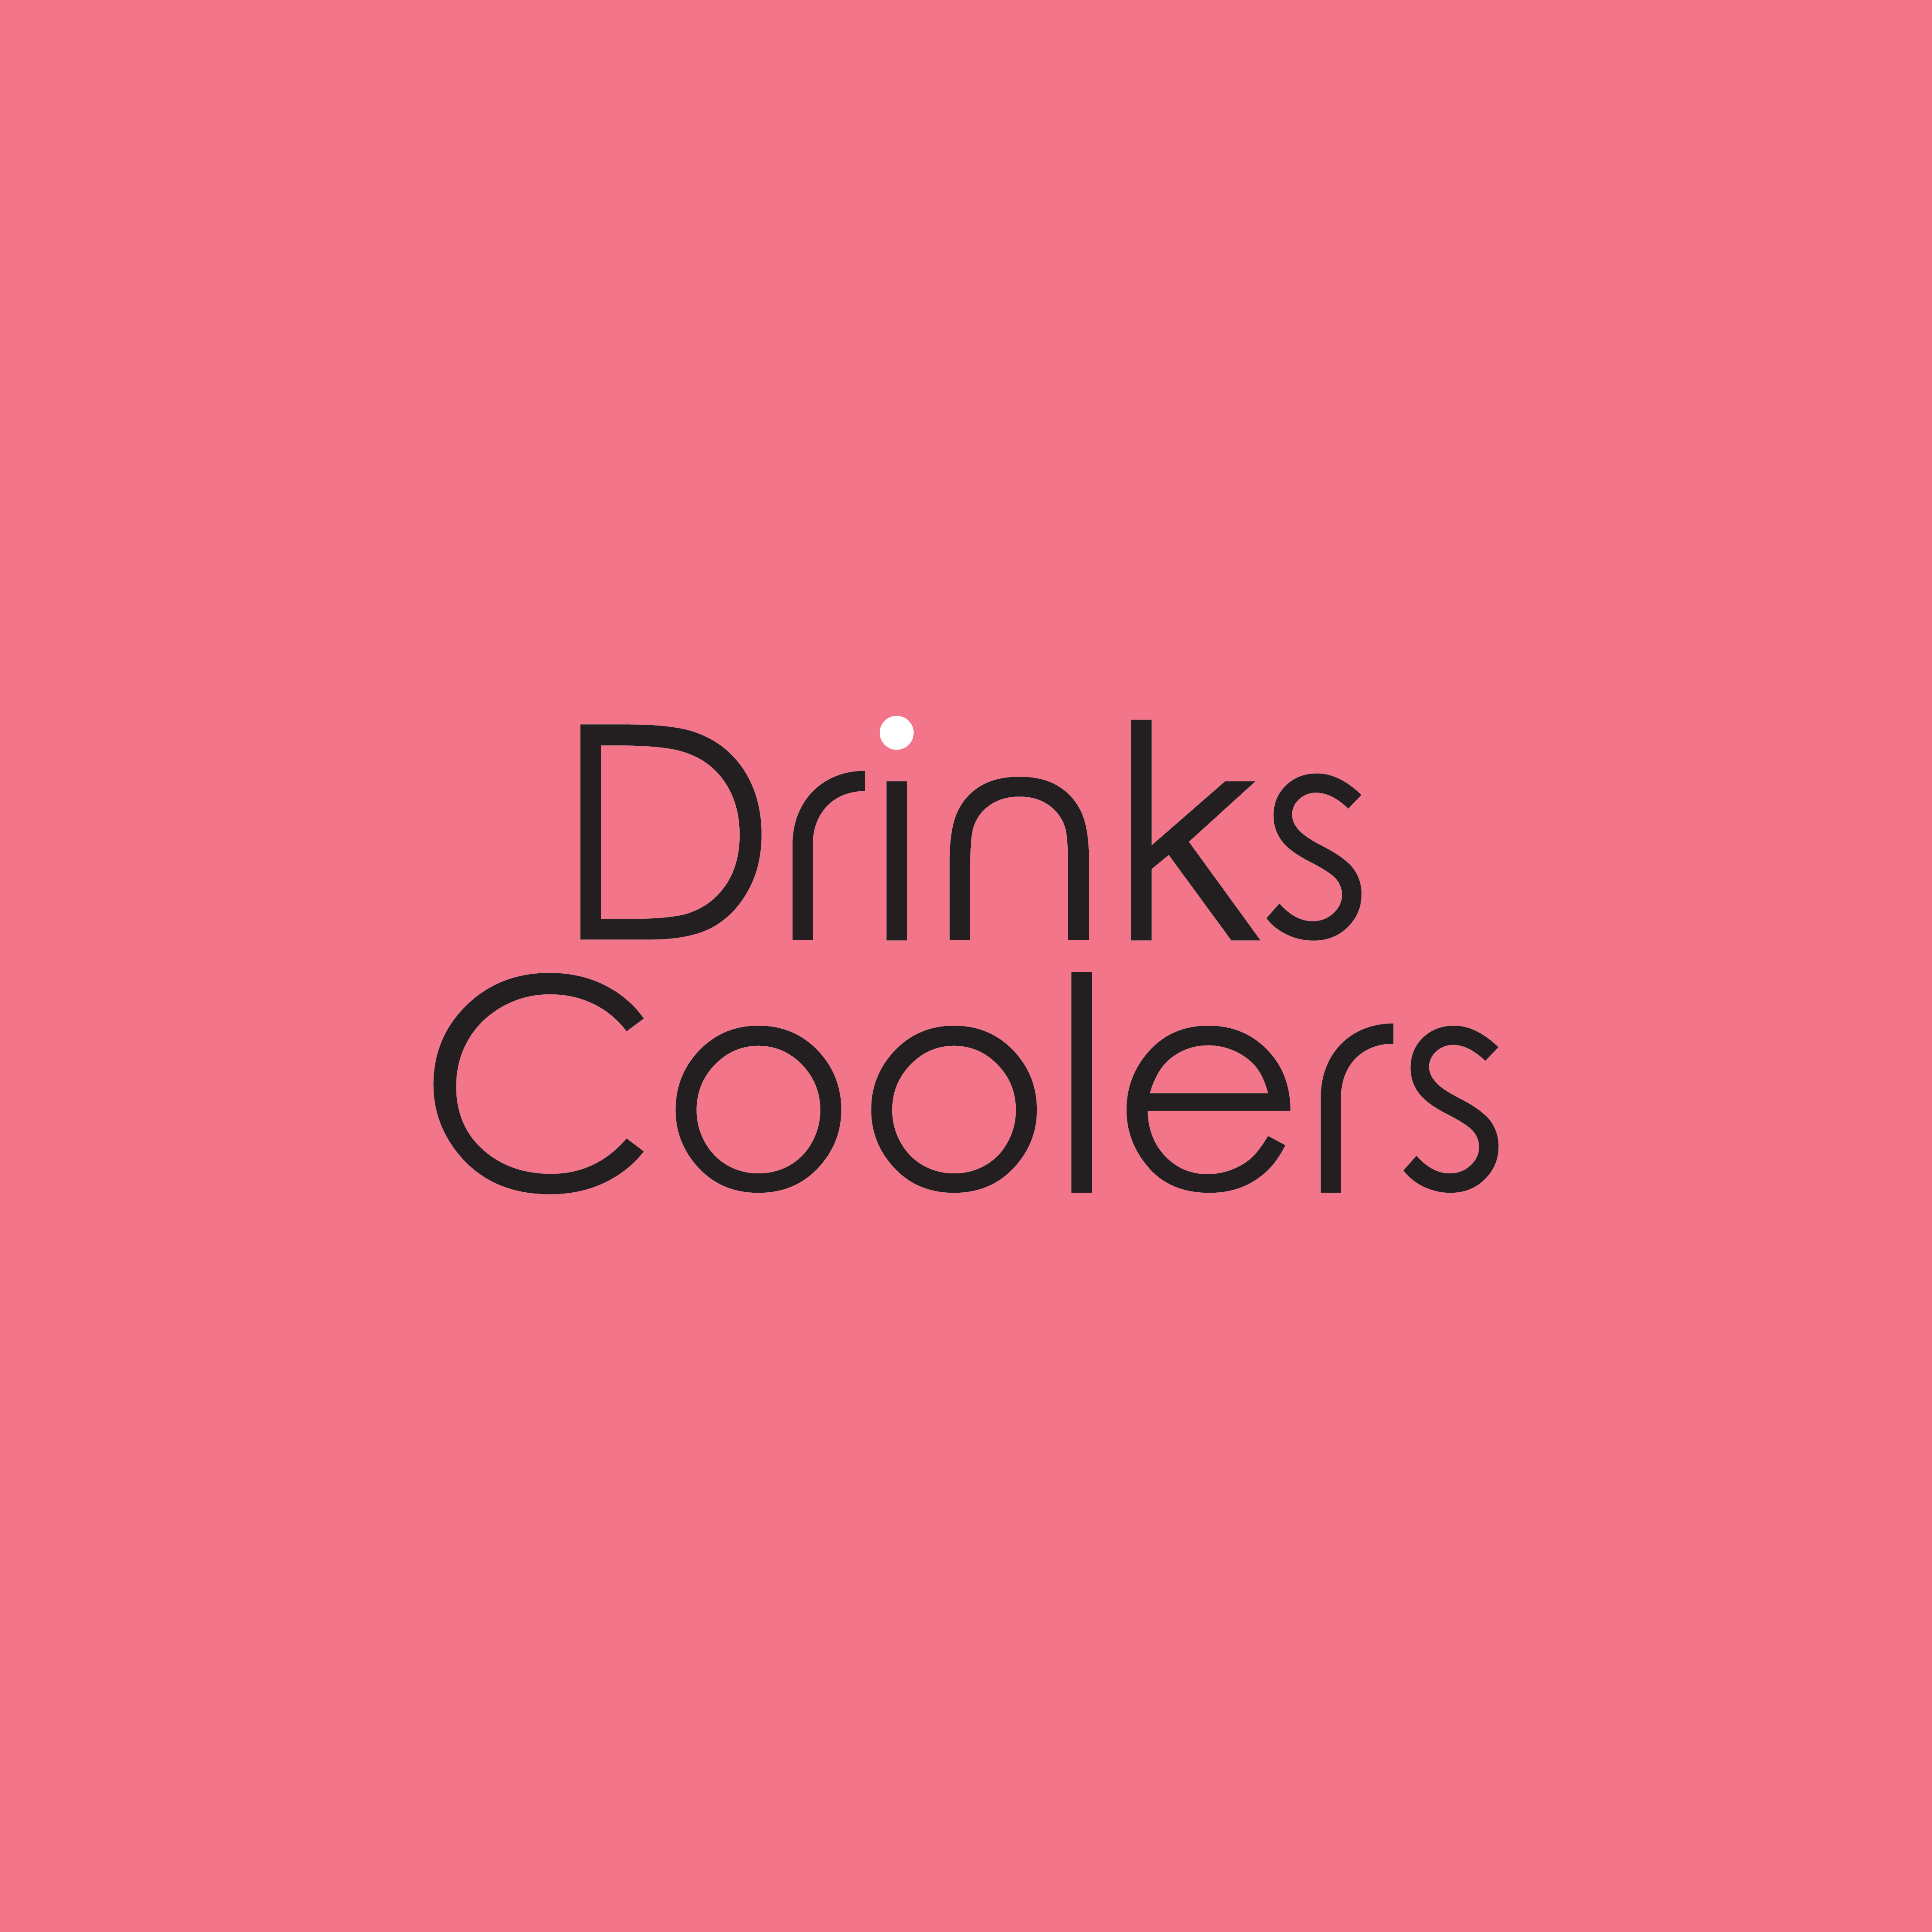 Drink Coolers